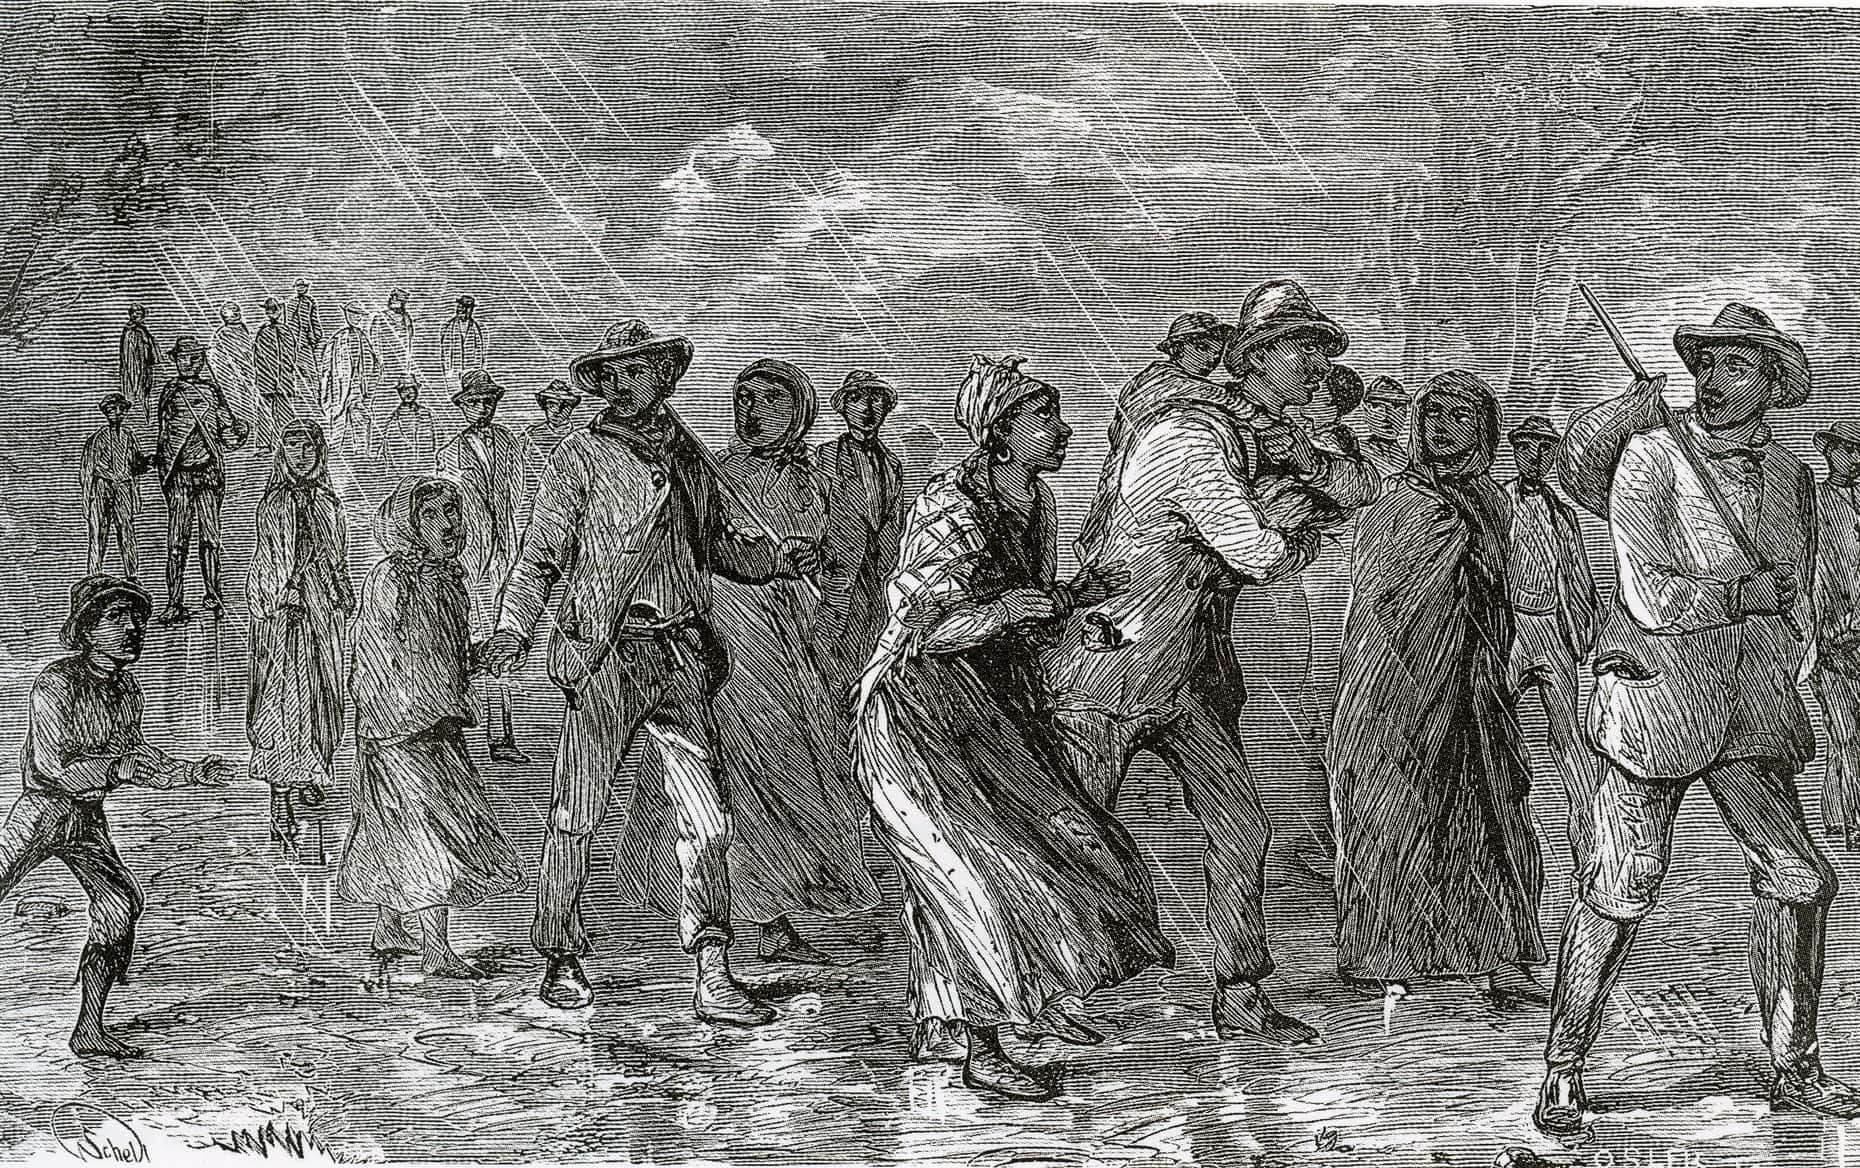 Covert Facts About the Underground Railroad